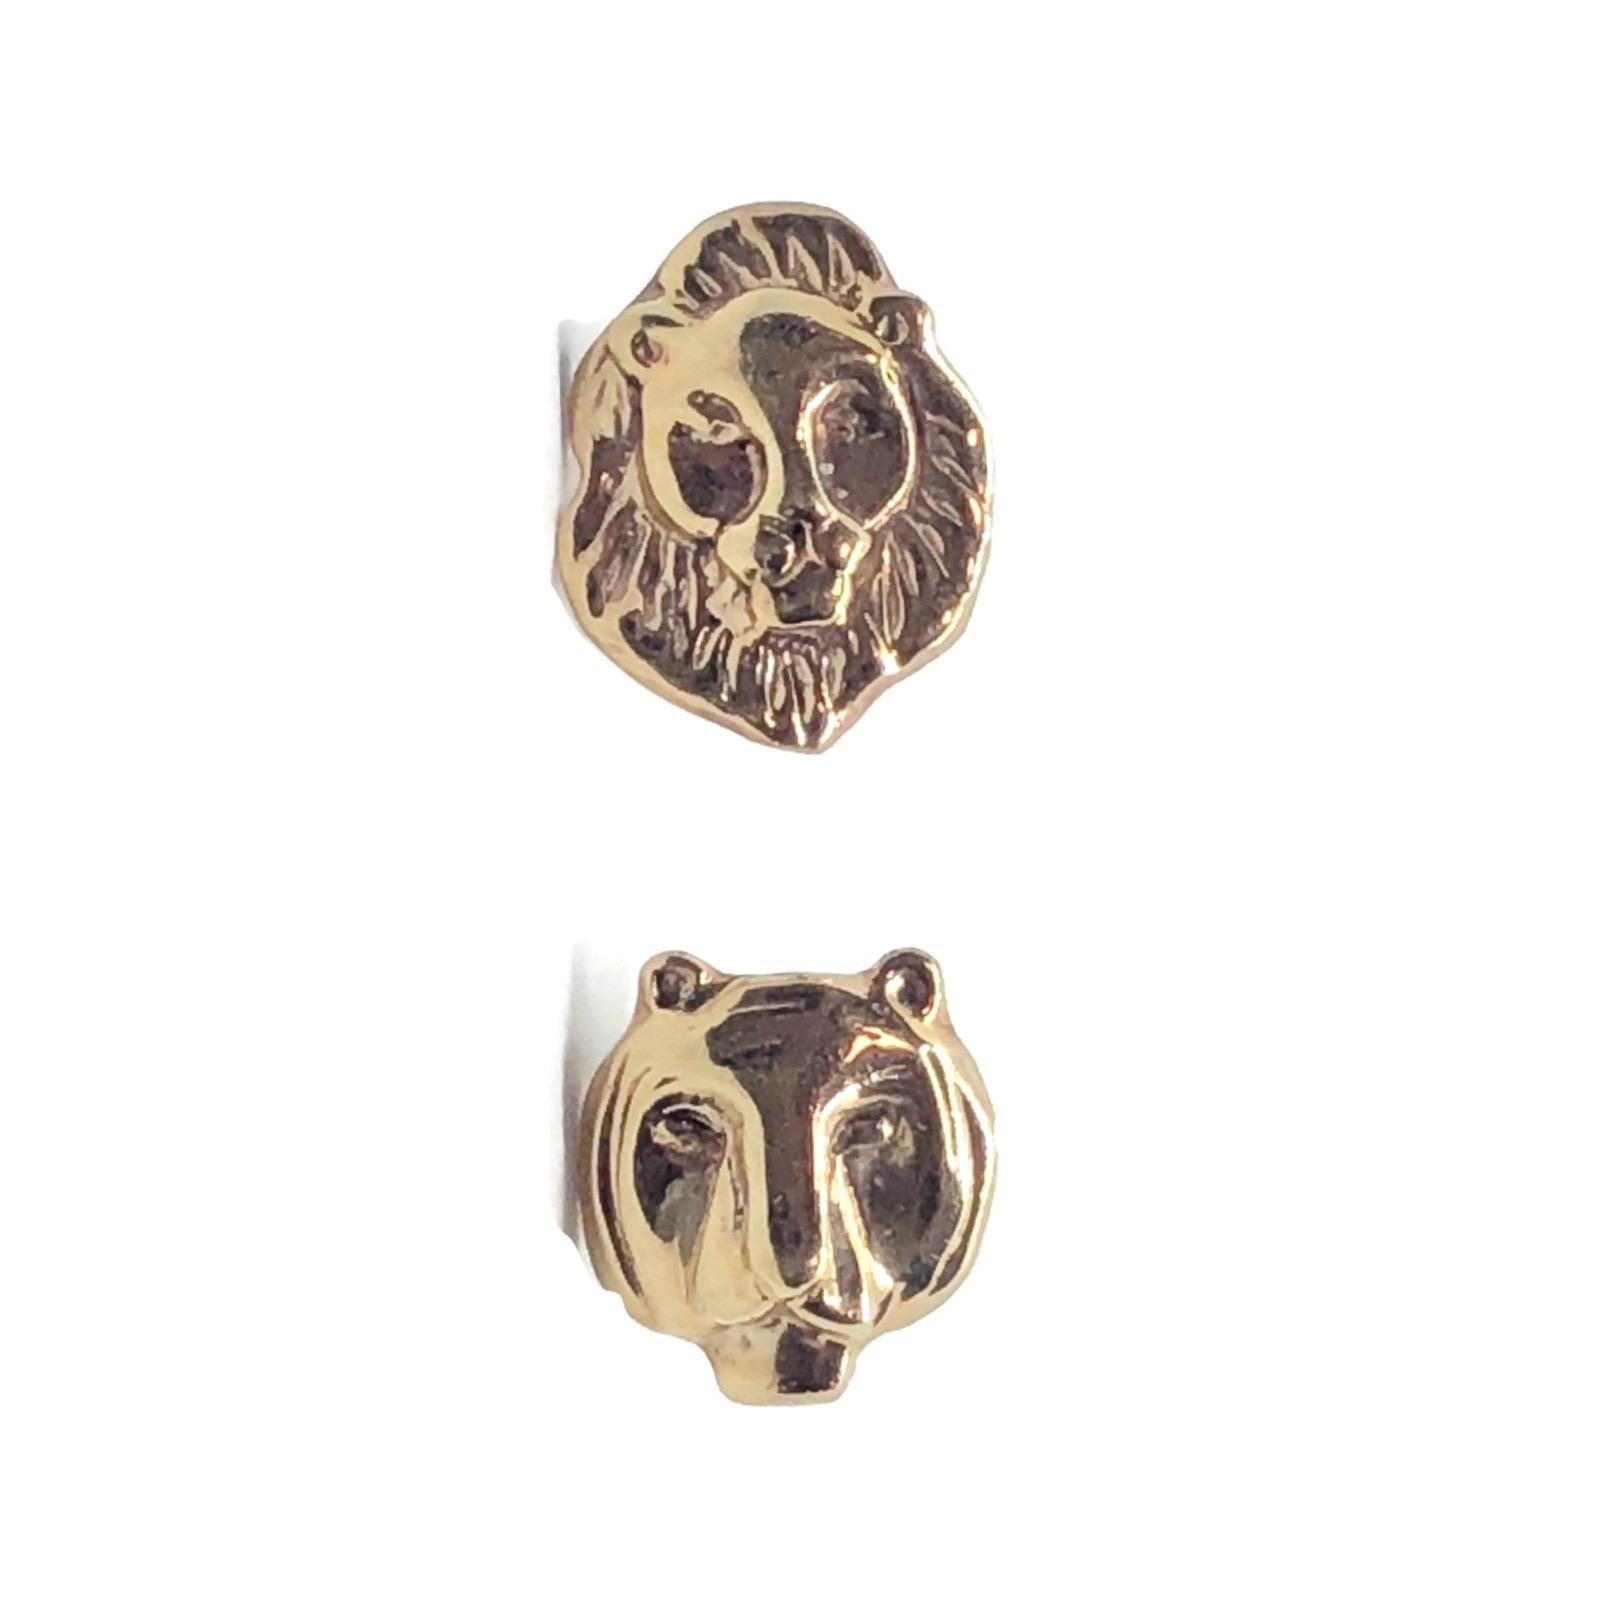 Art Nouveau Vintage Unisex Cufflinks in Lion and Lioness Design Made in 14 Karat Yellow Gold For Sale